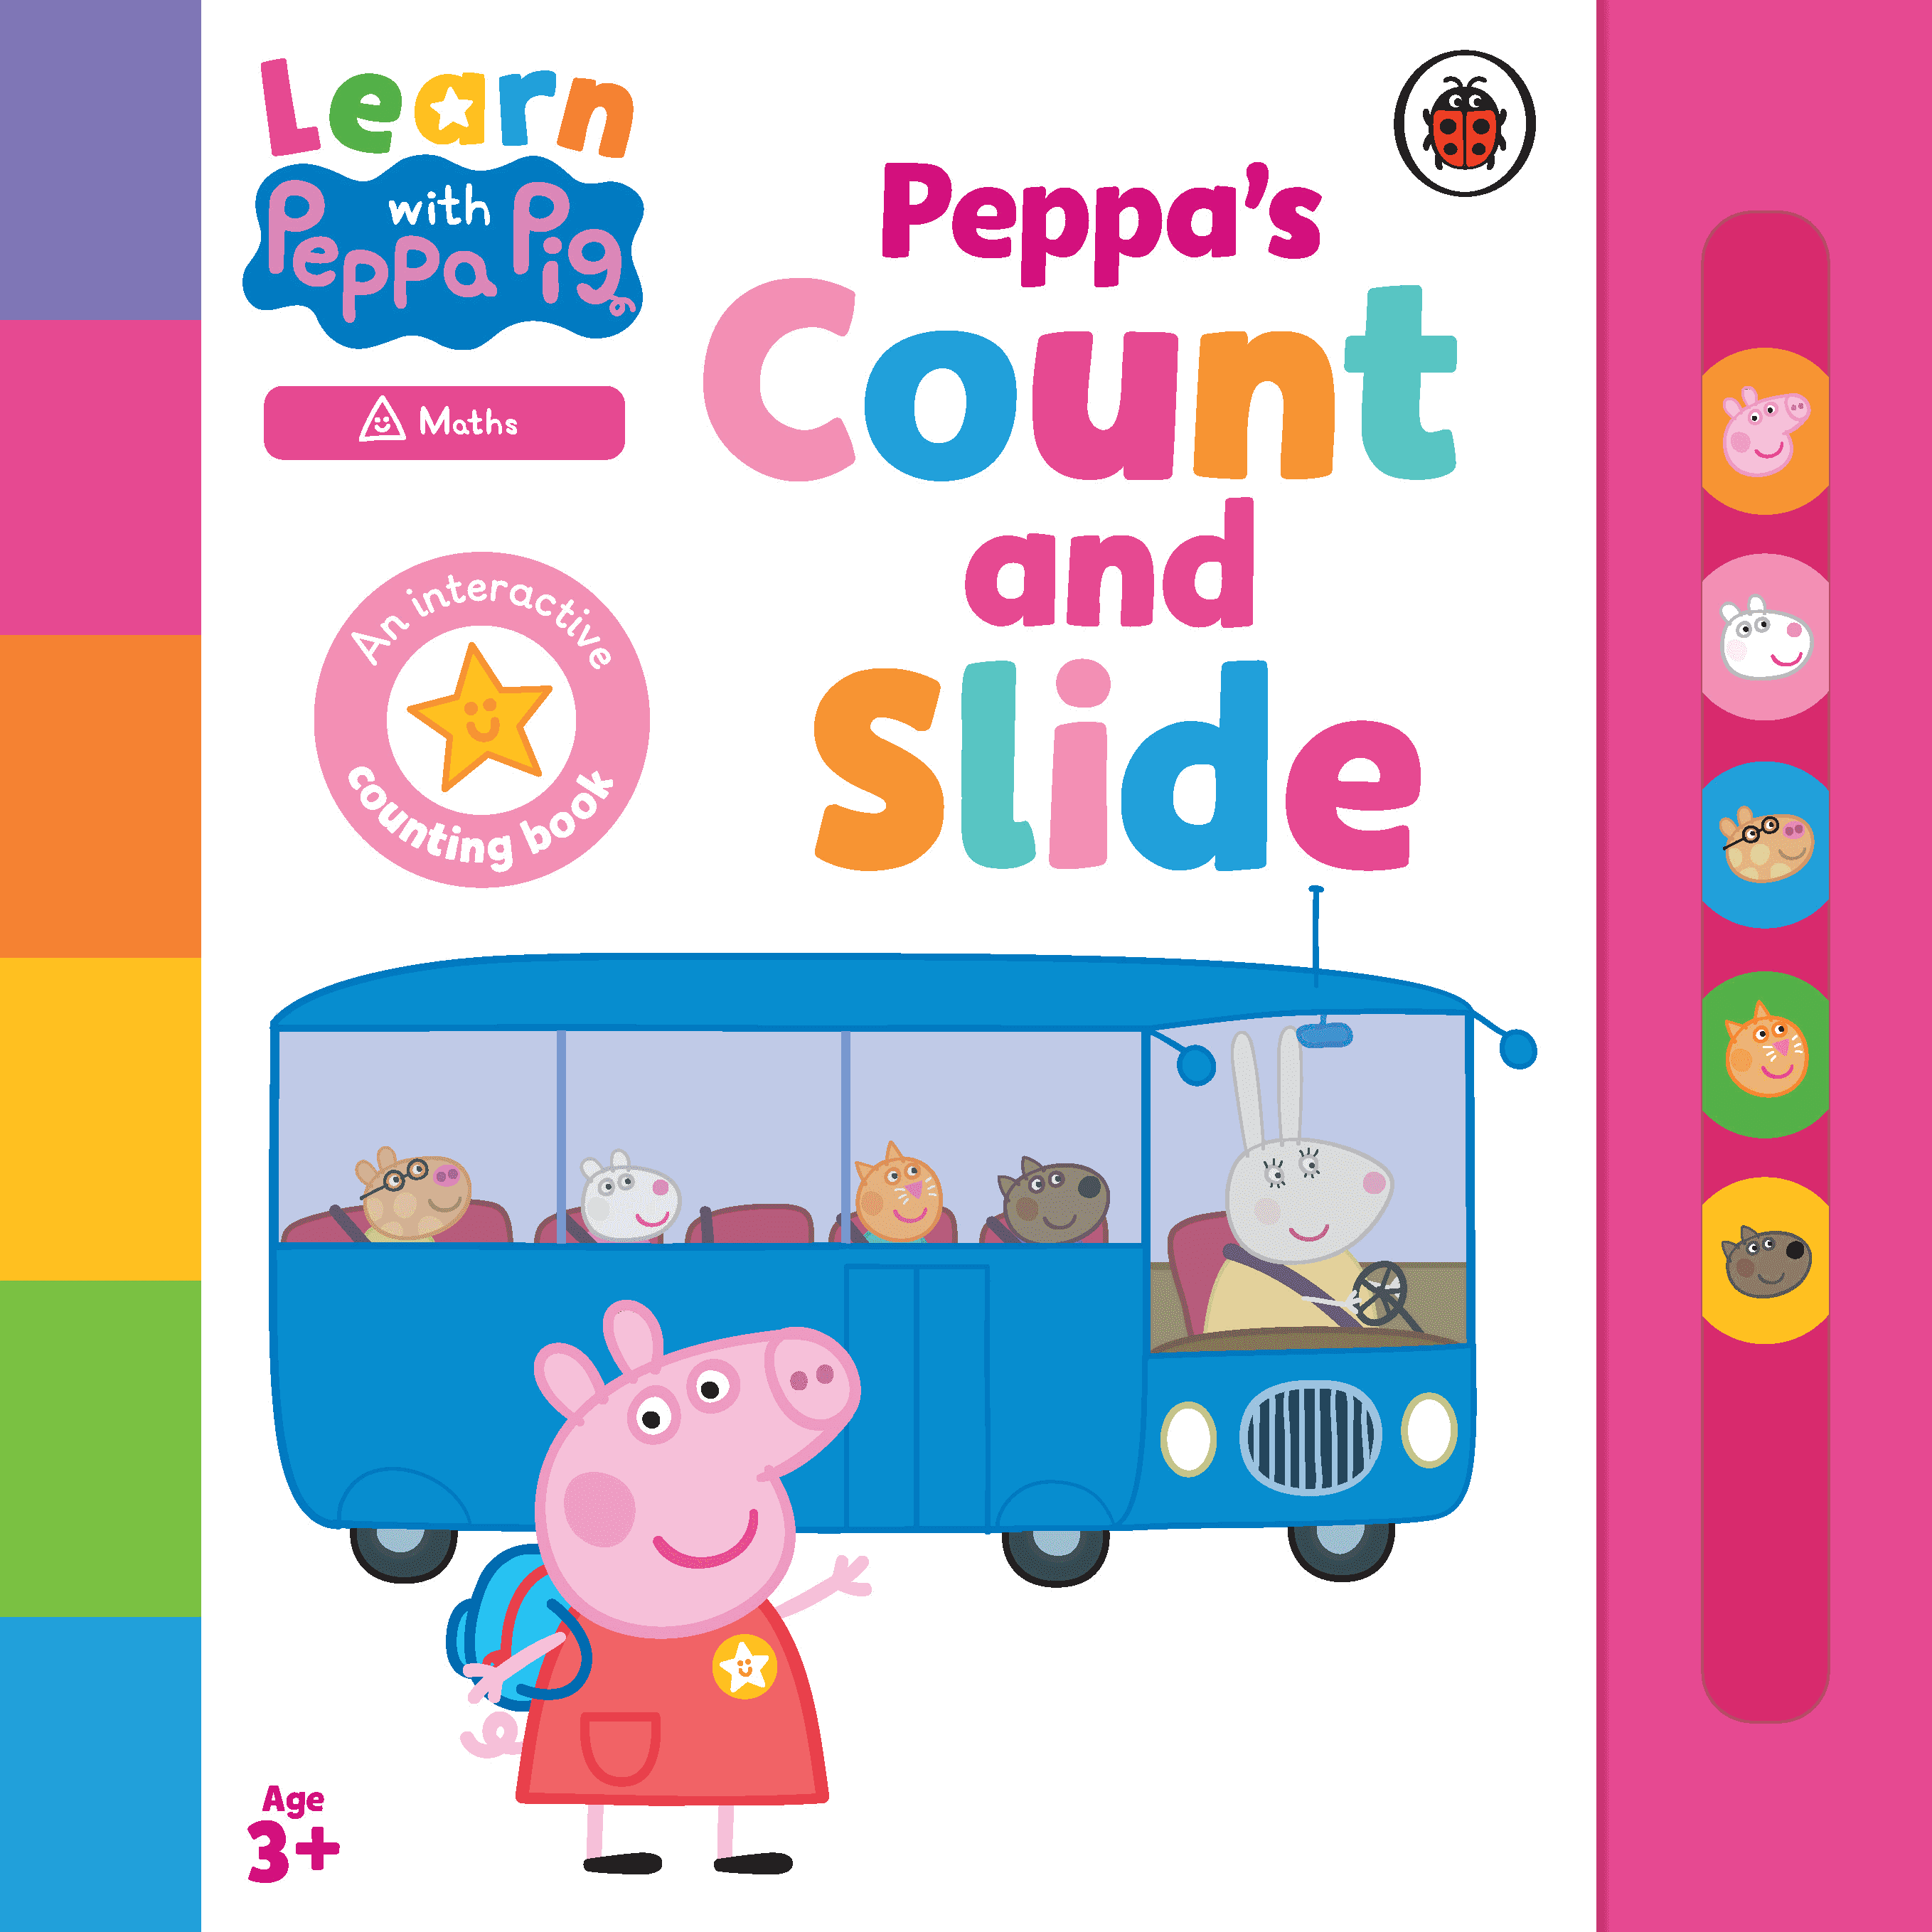 Peppa's Count and Slide